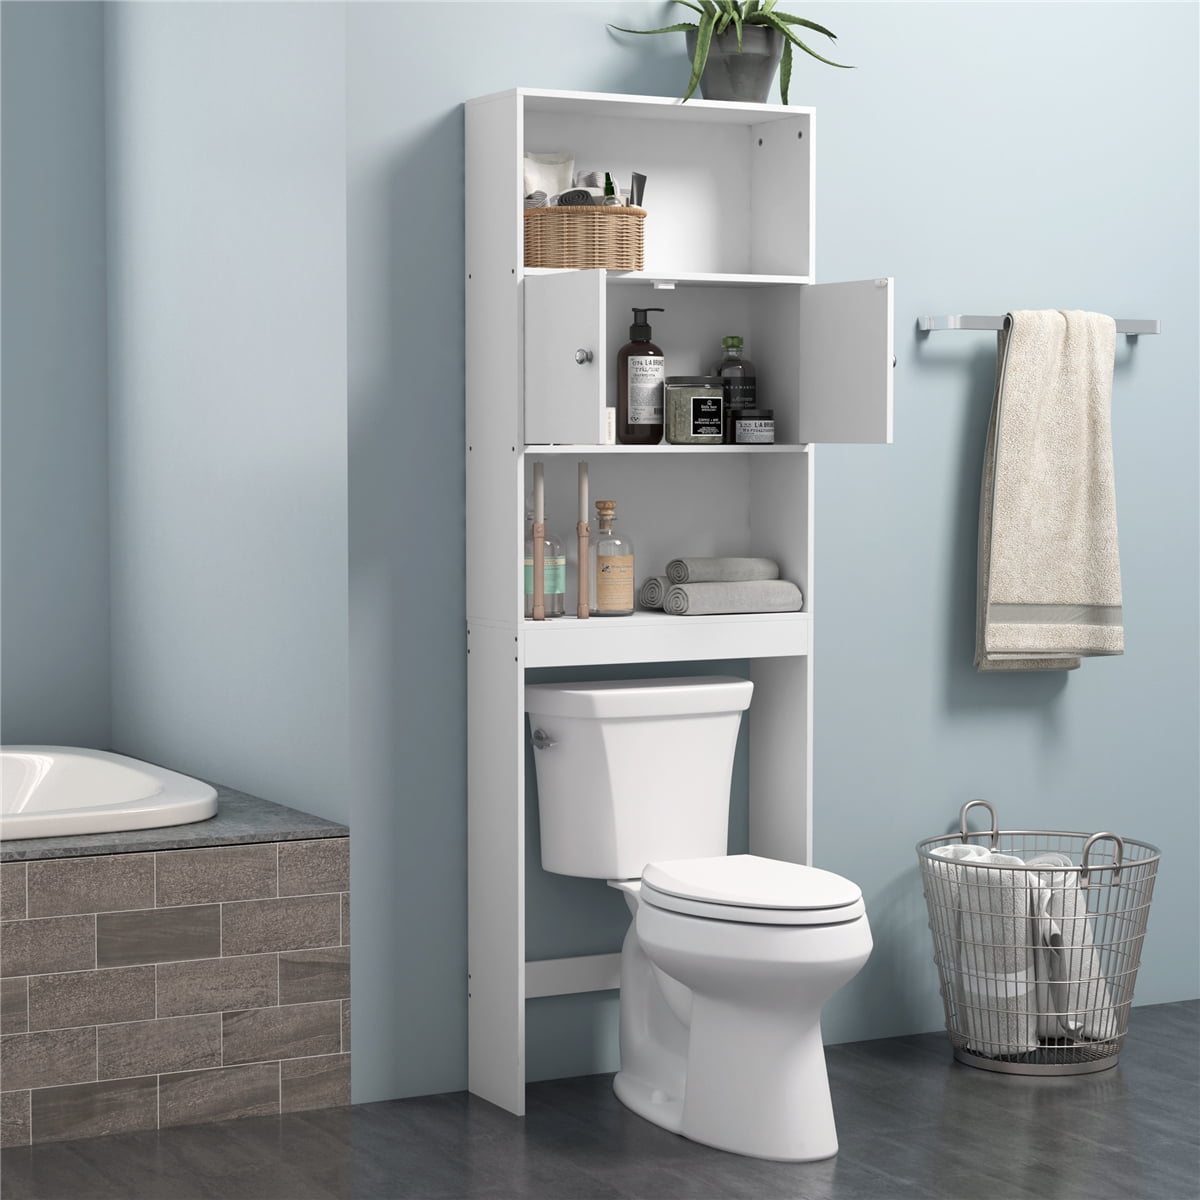 Bathroom Cabinet Storage Wall, Glass Shelves Over Toilet